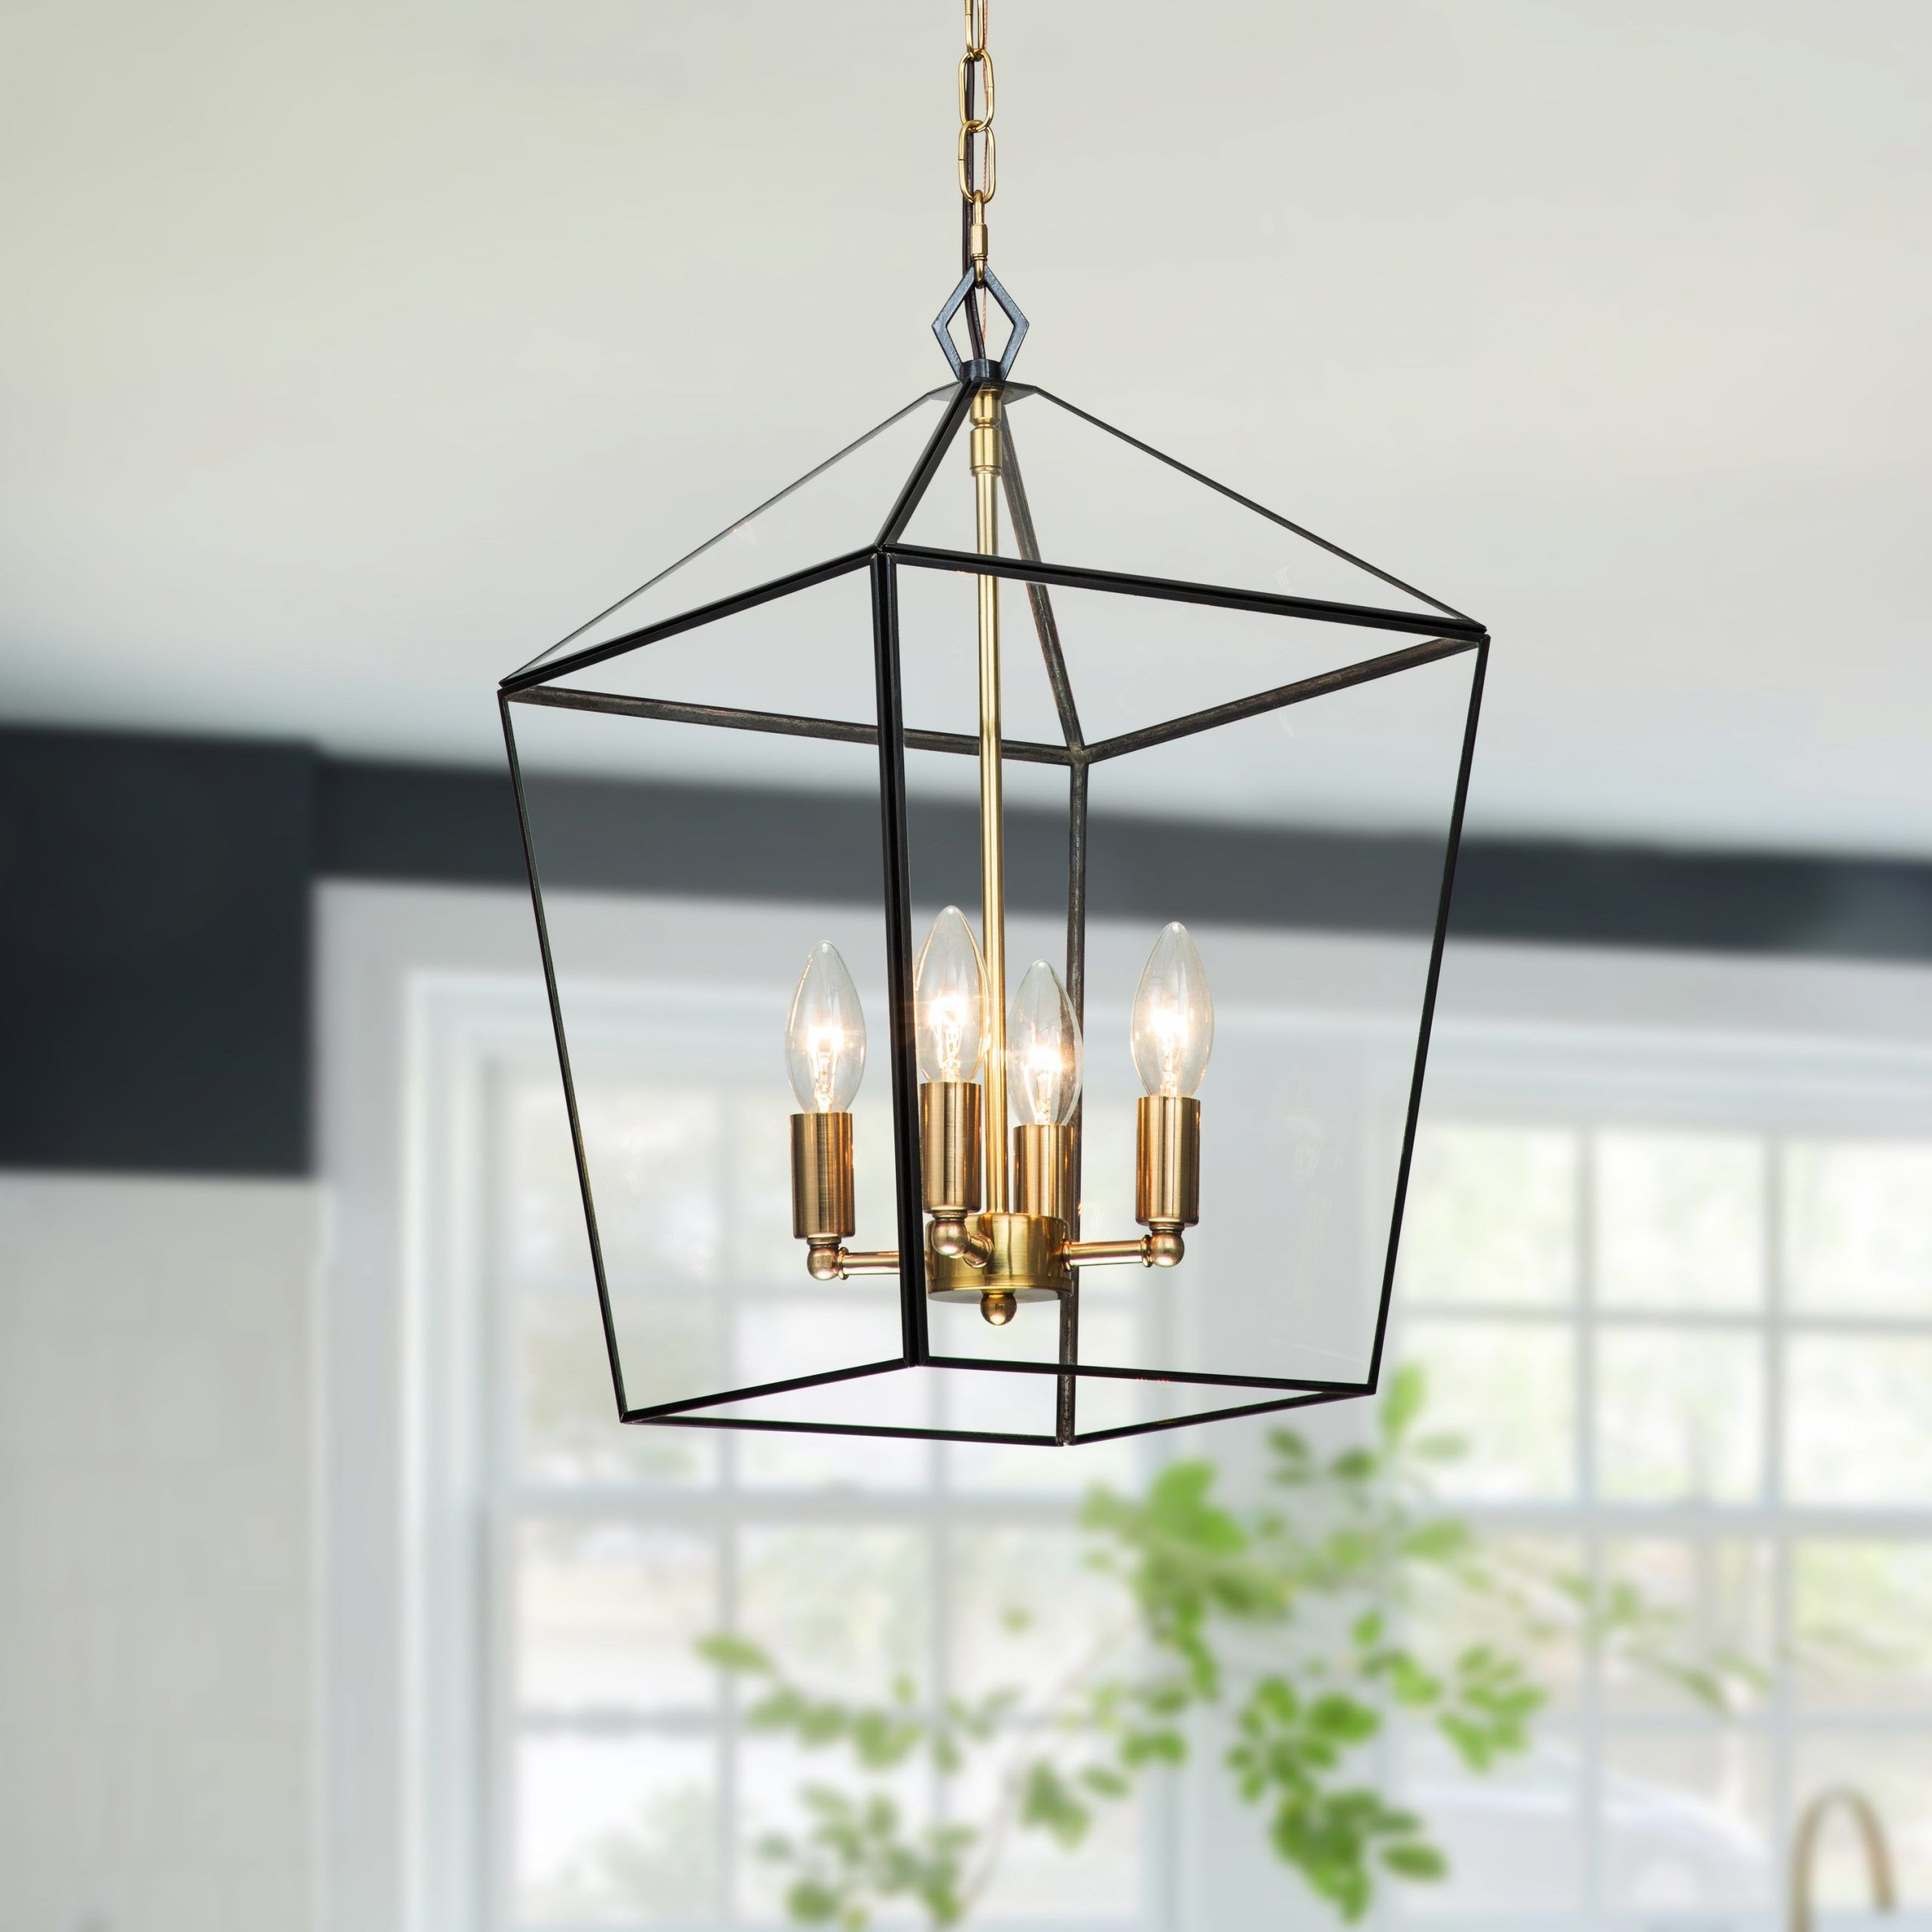 4 Light Brass Lantern Pendant With Clear Tempered Glass Panes – W12" X E12"  X H (View 10 of 10)